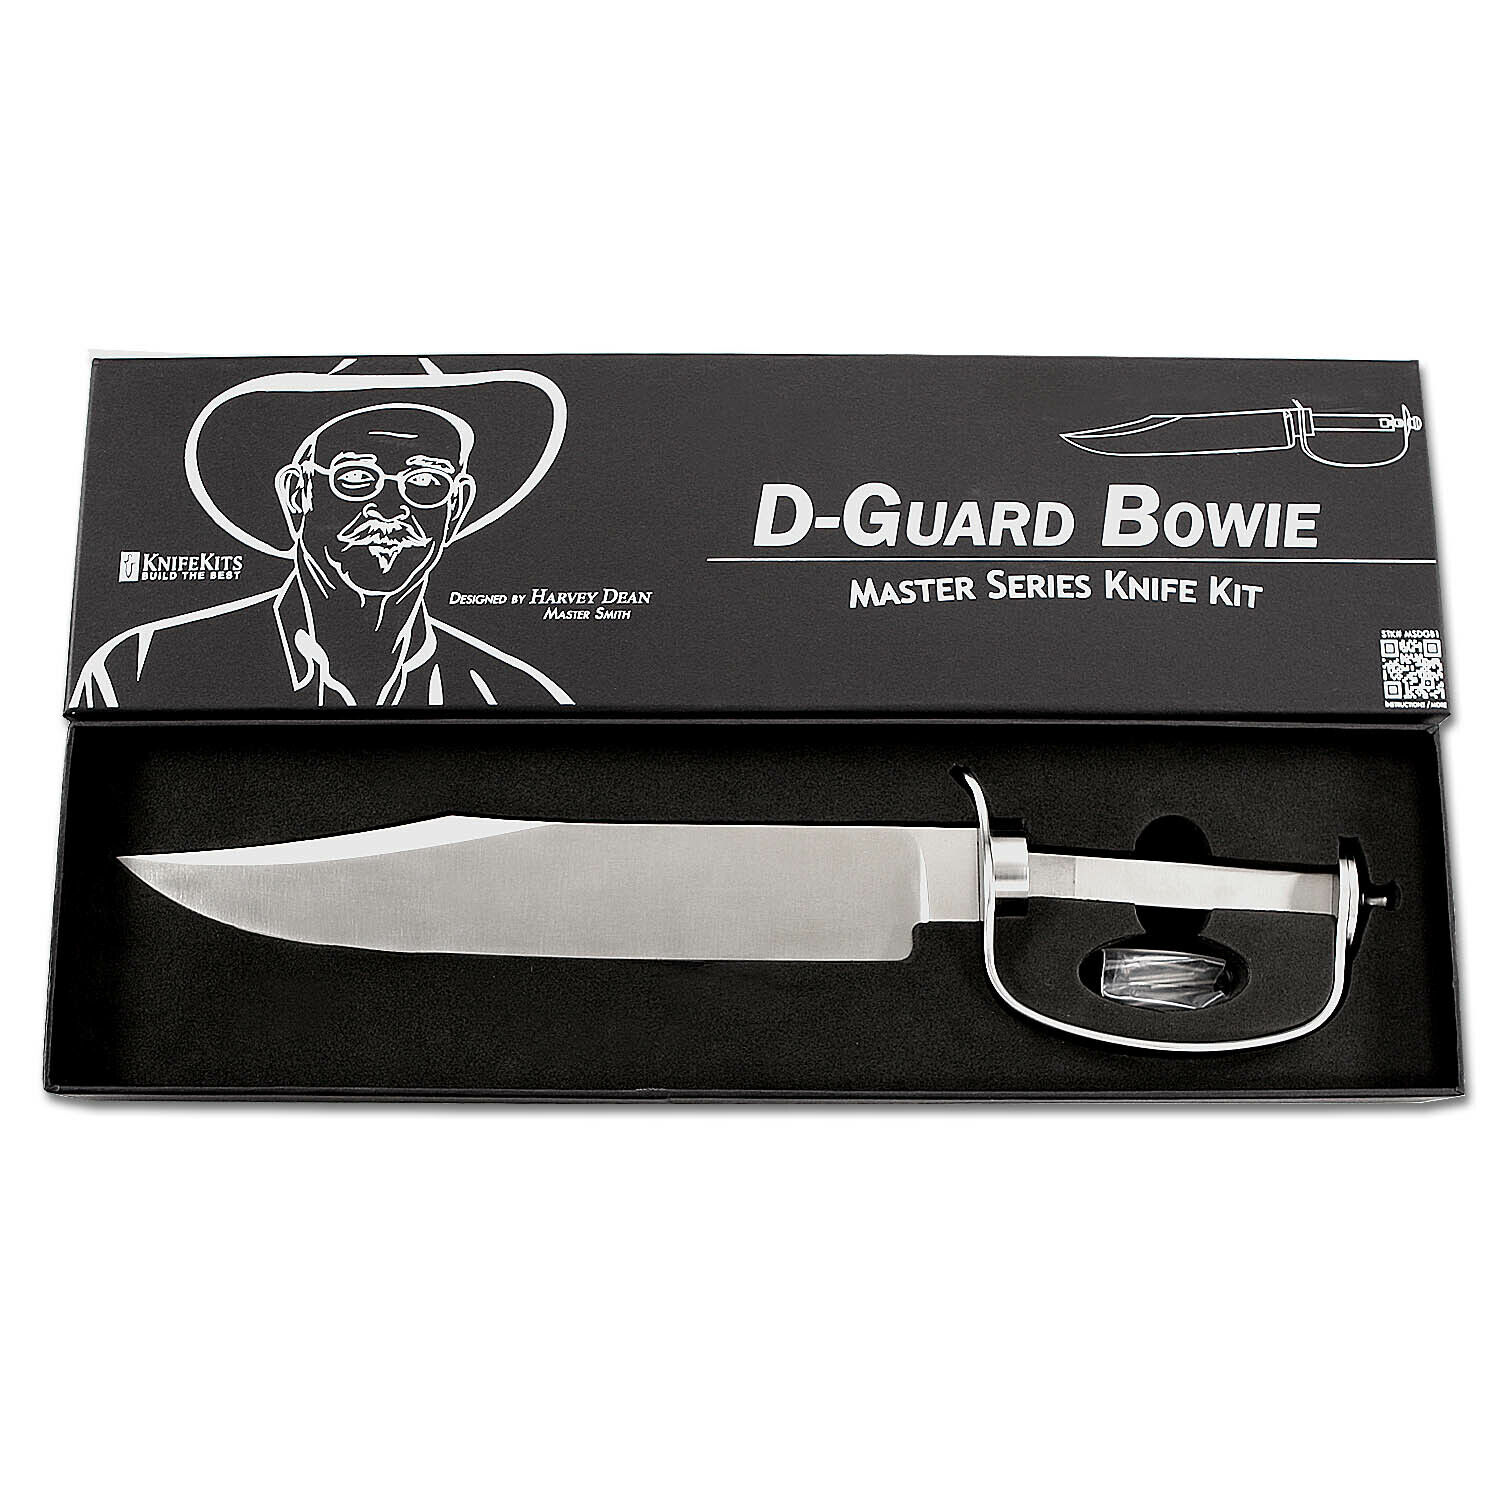 D-Guard Bowie - Master Series Fixed Blade Knife Kit - (Designed by Harvey Dean)